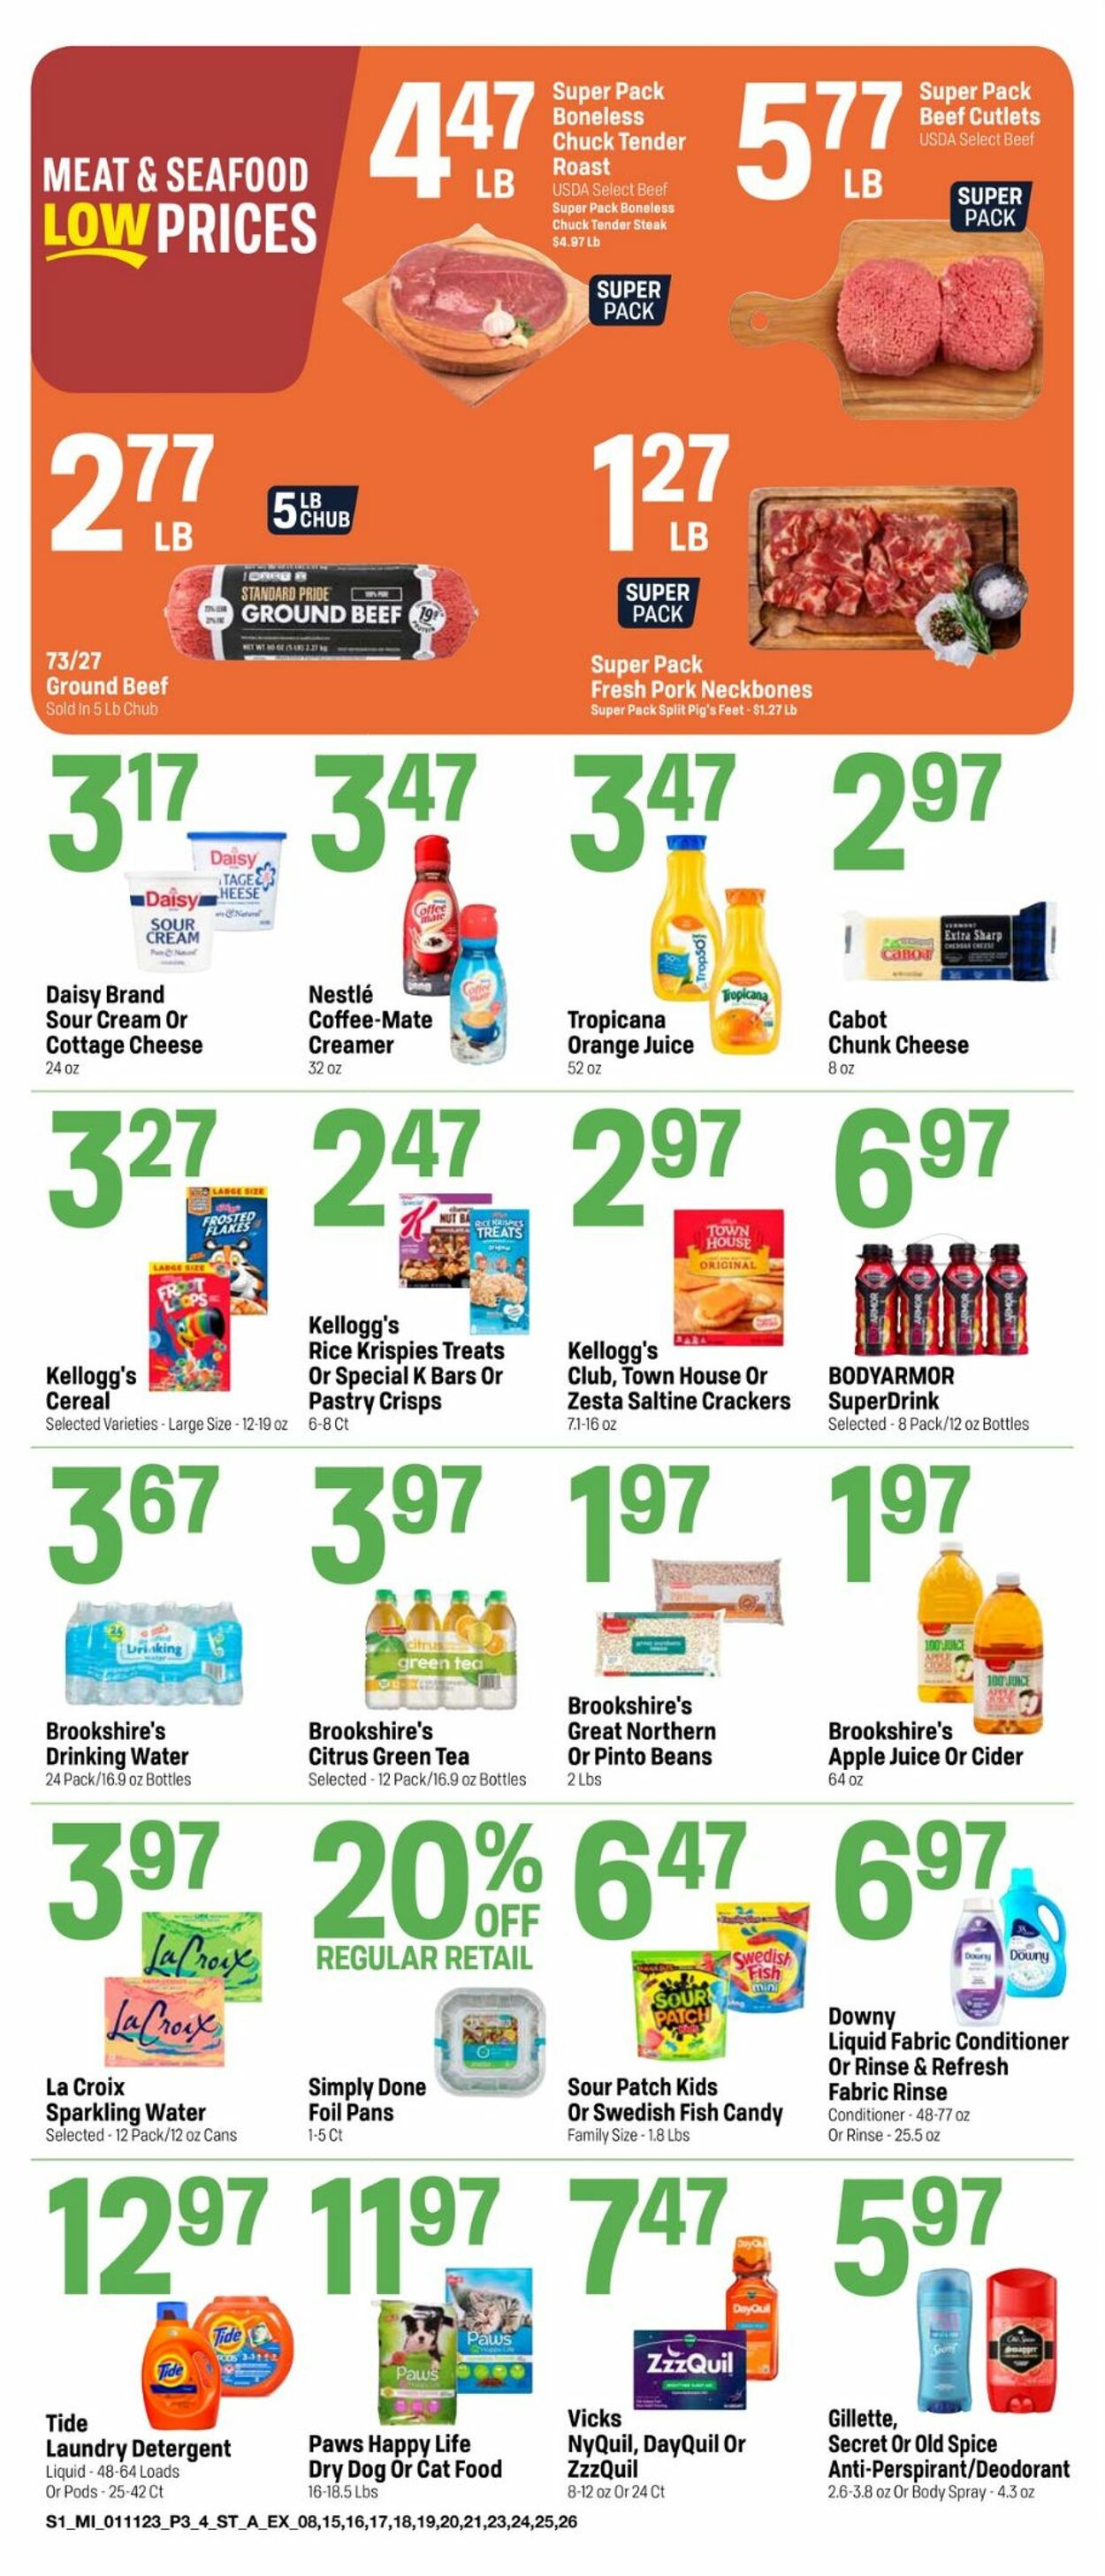 Super 1 Foods Ad from 01/11/2023